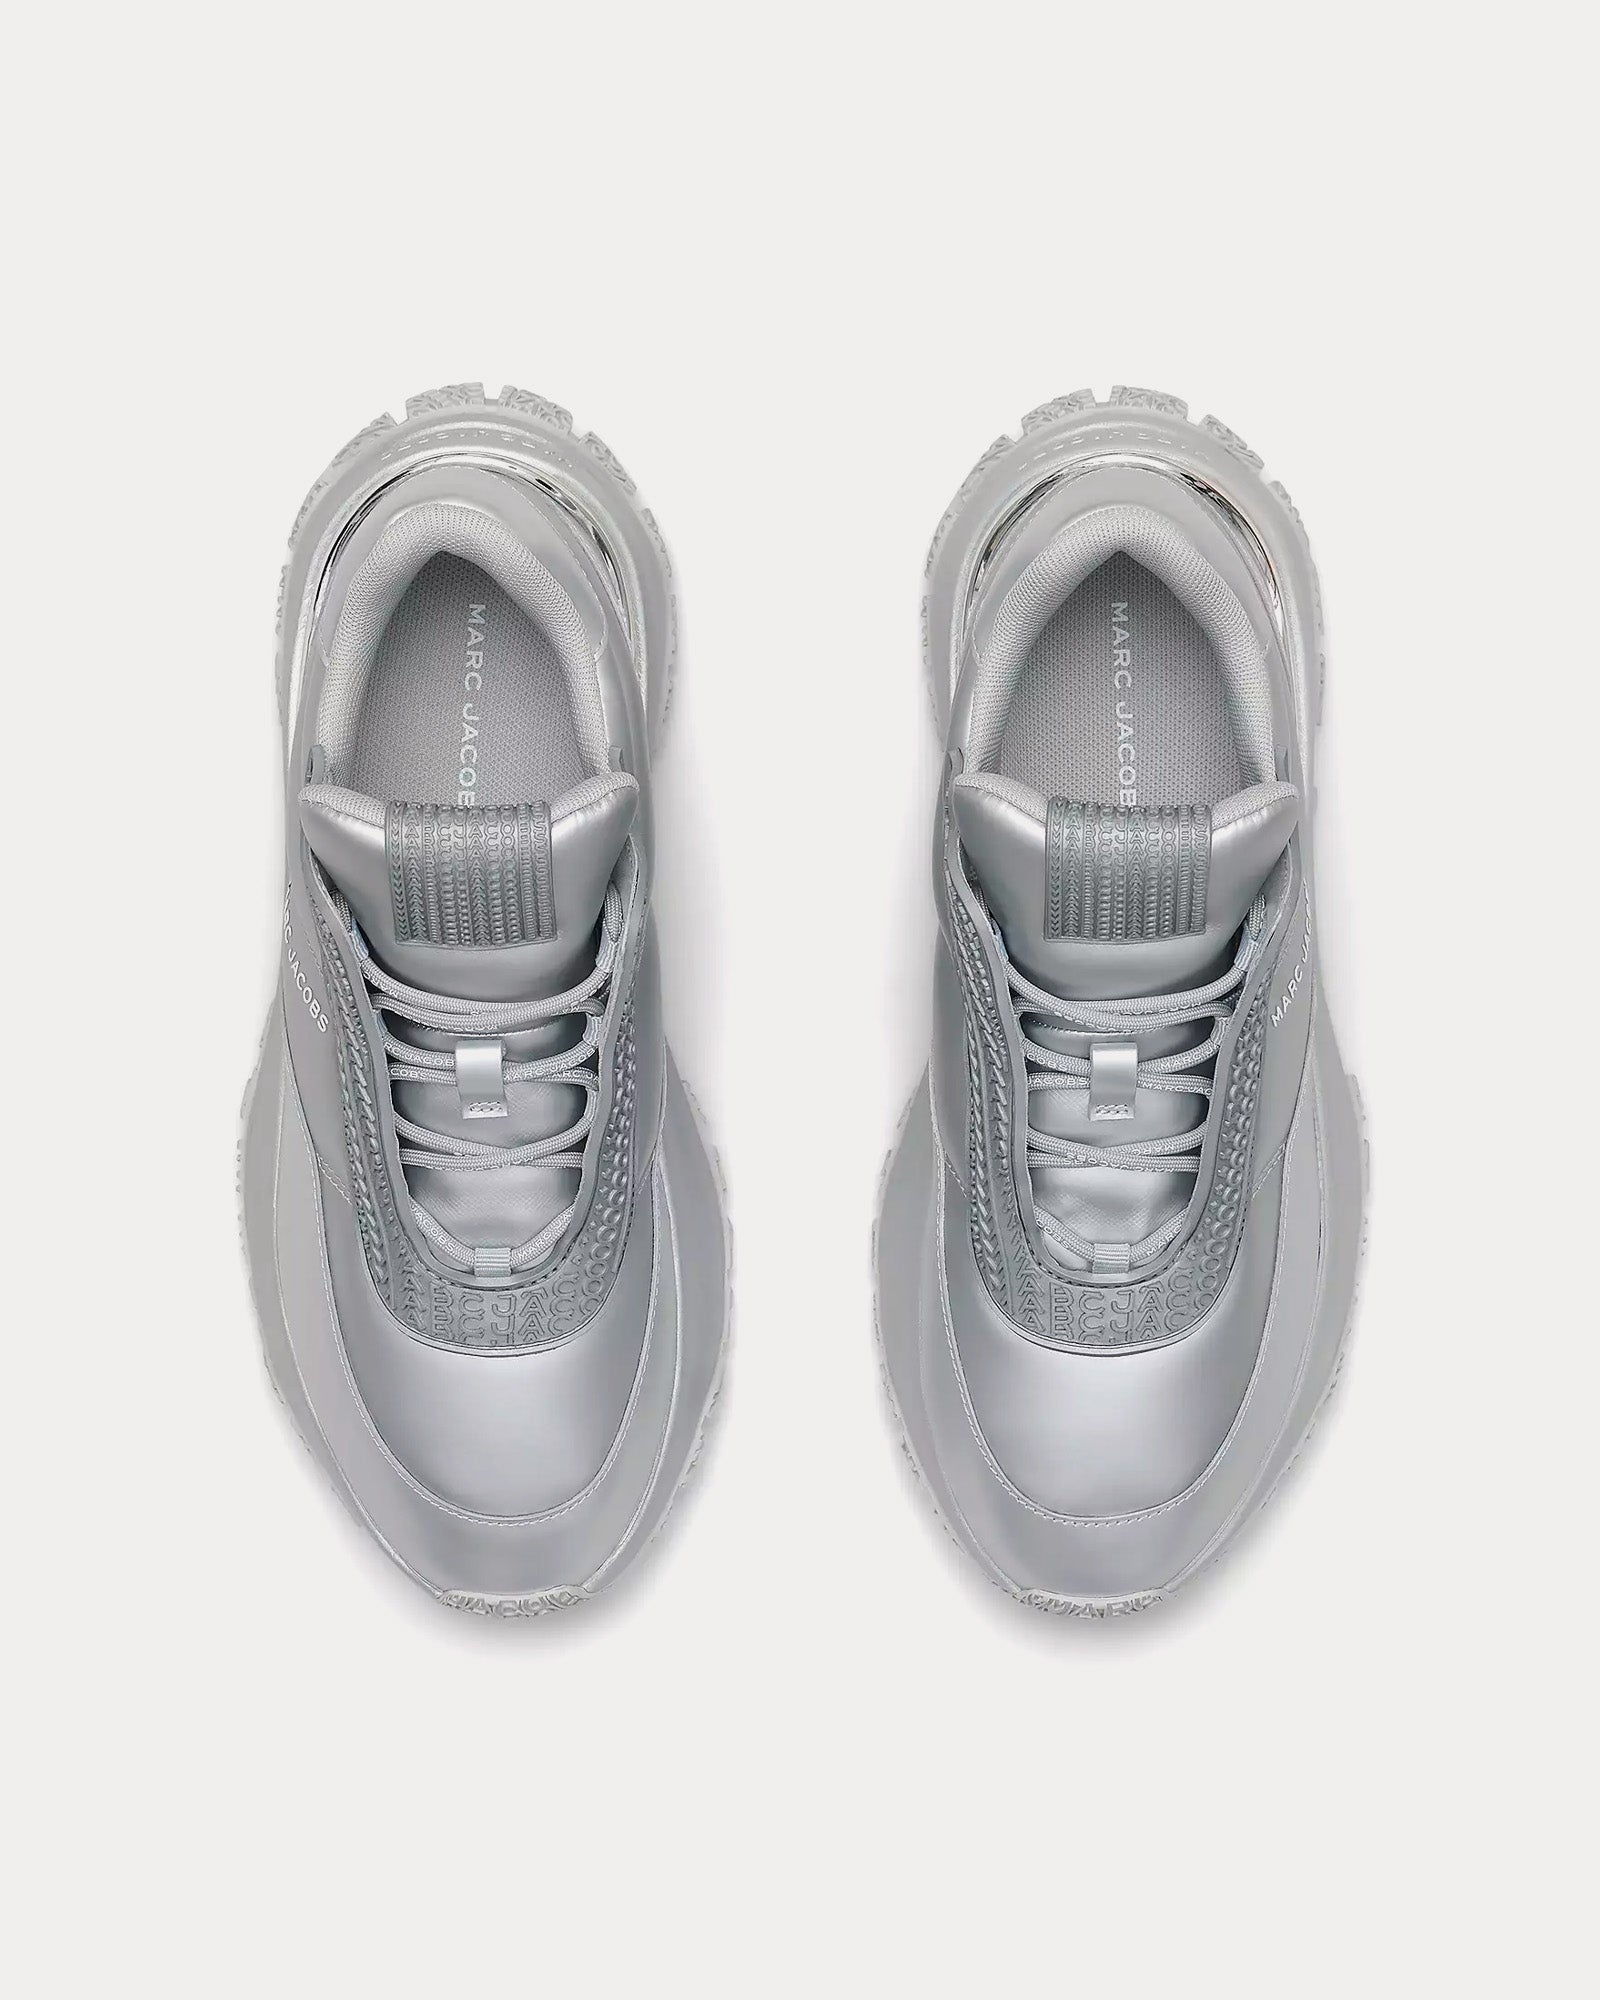 Marc Jacobs - The Metallic Lazy Runner Silver Low Top Sneakers